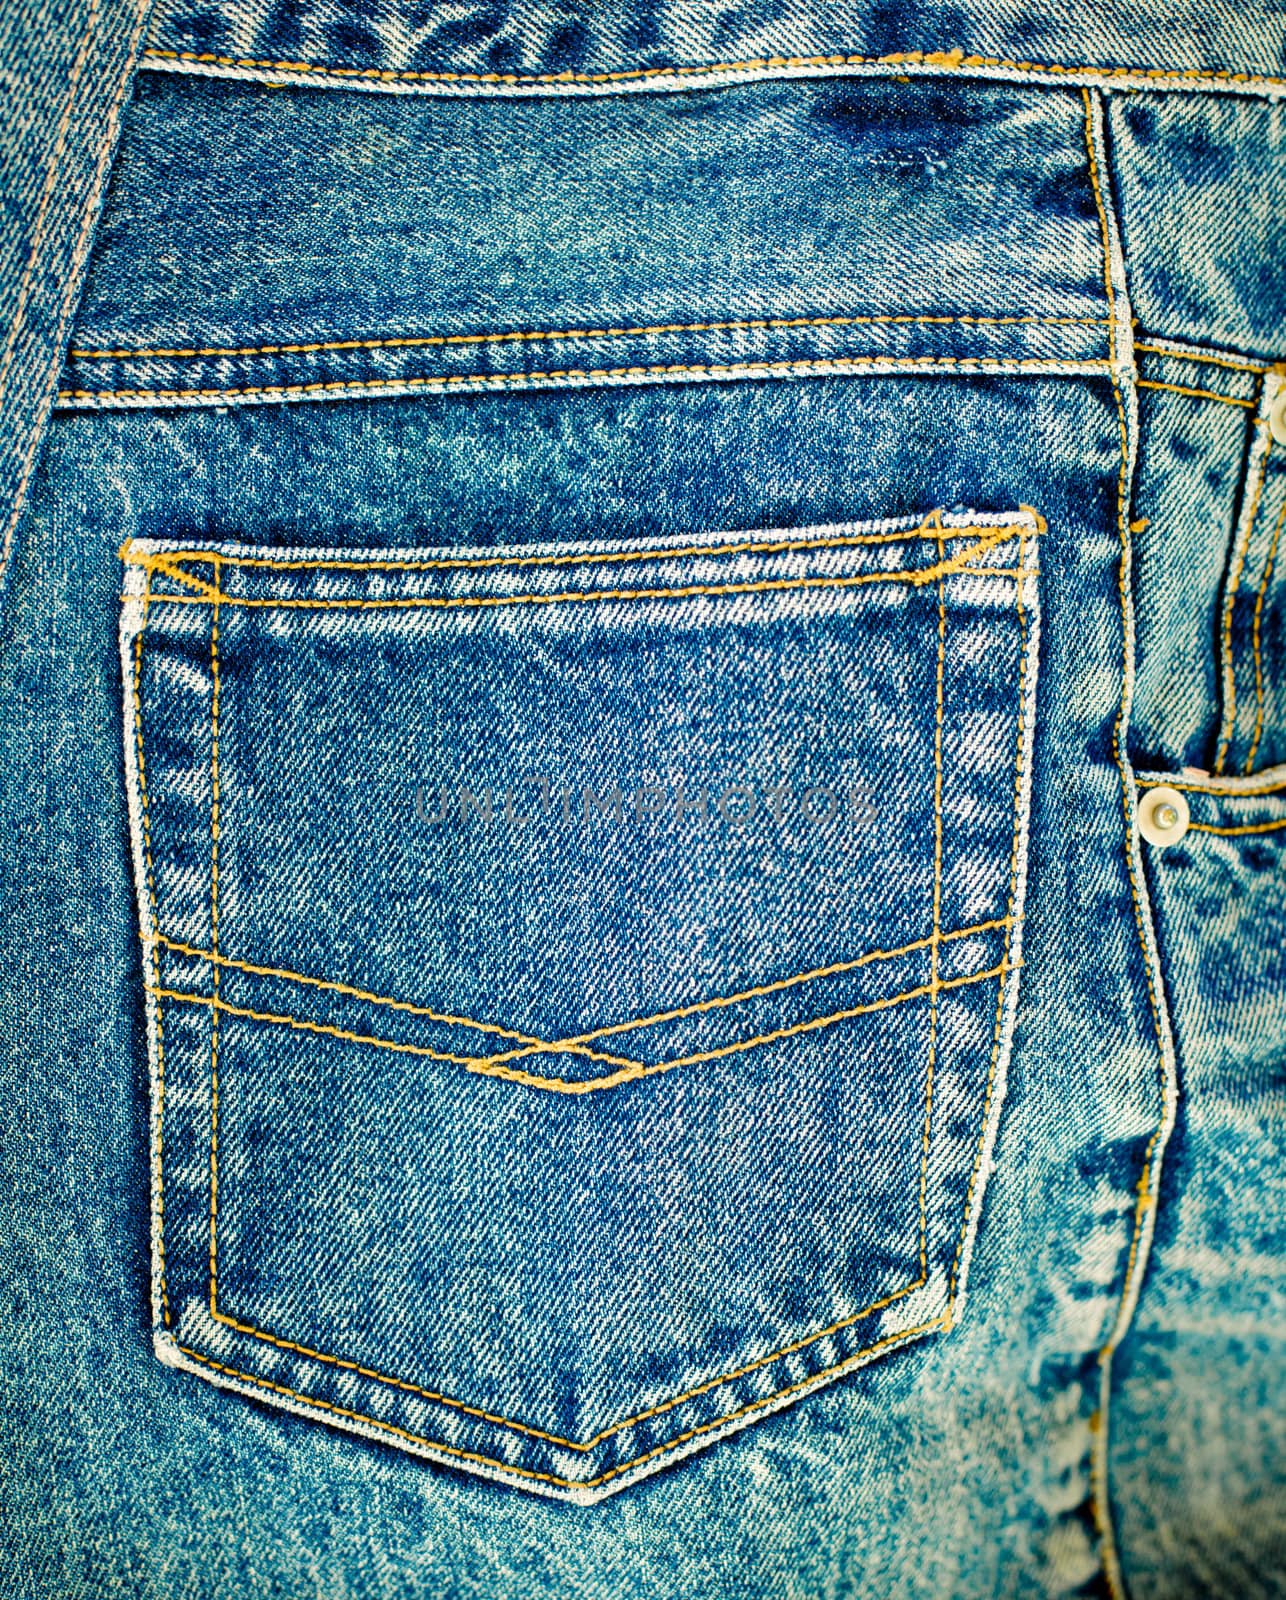 Blue jeans detail with empty pocket